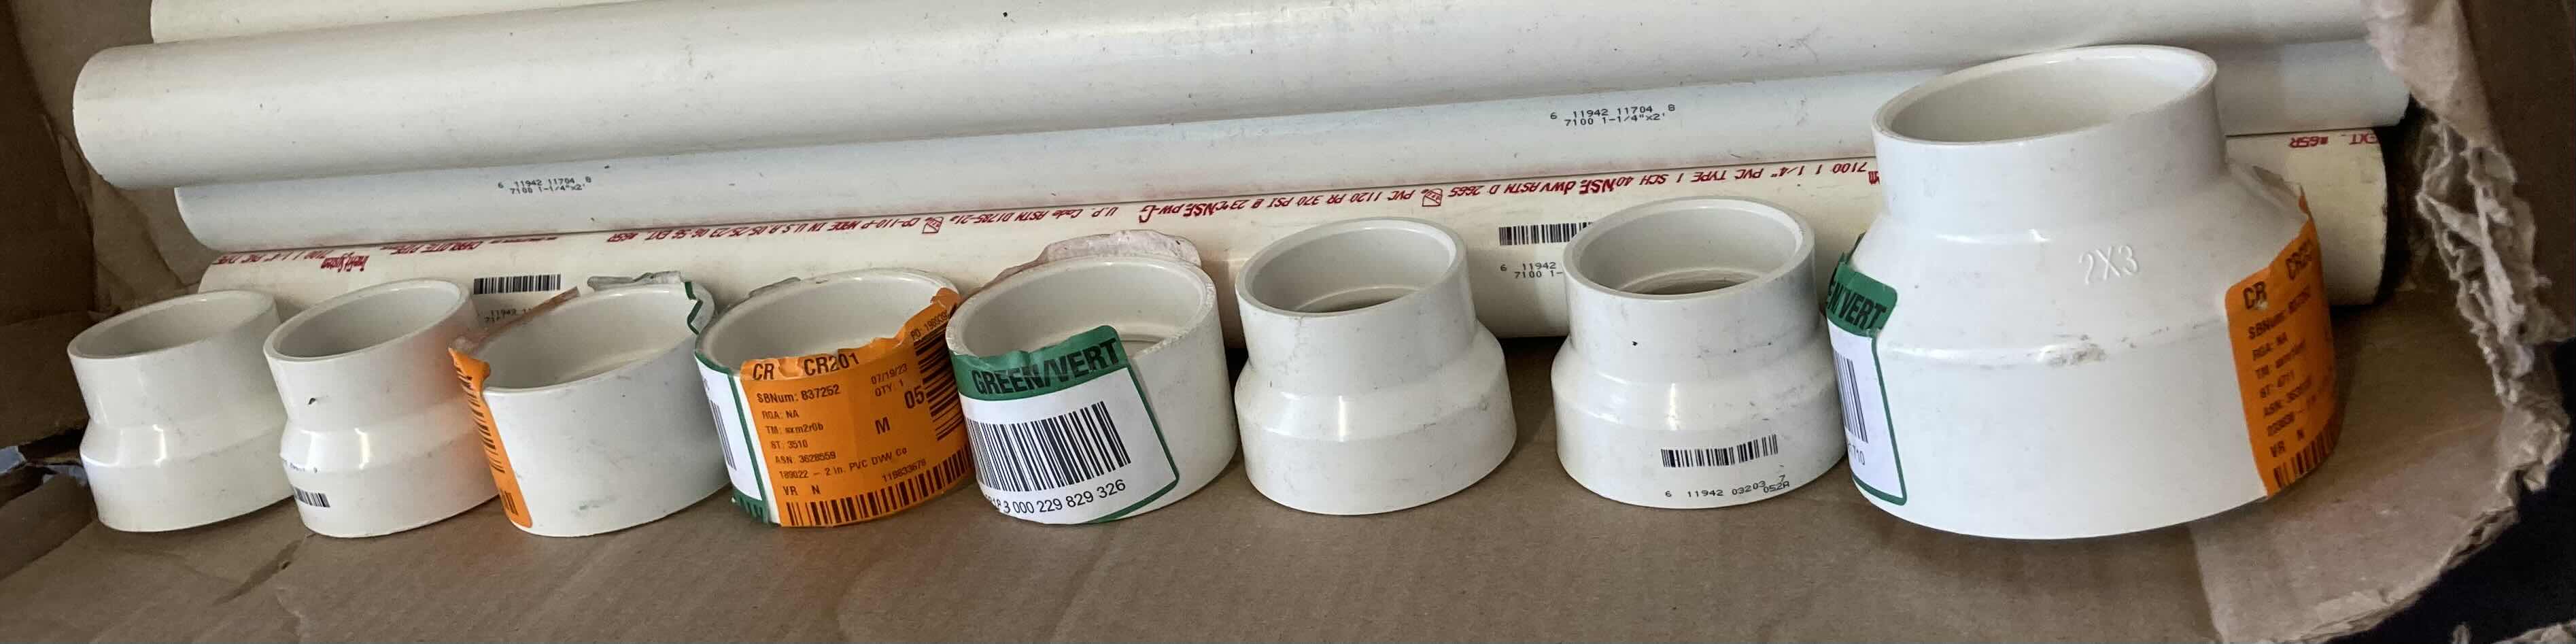 Photo 3 of Charlotte  PVC PIPES 1-1/4” X 24” (19) & PVC PIPES 2.25” X 24” (2) W 2” COUPLINGS & ADAPTER COUPLINGS